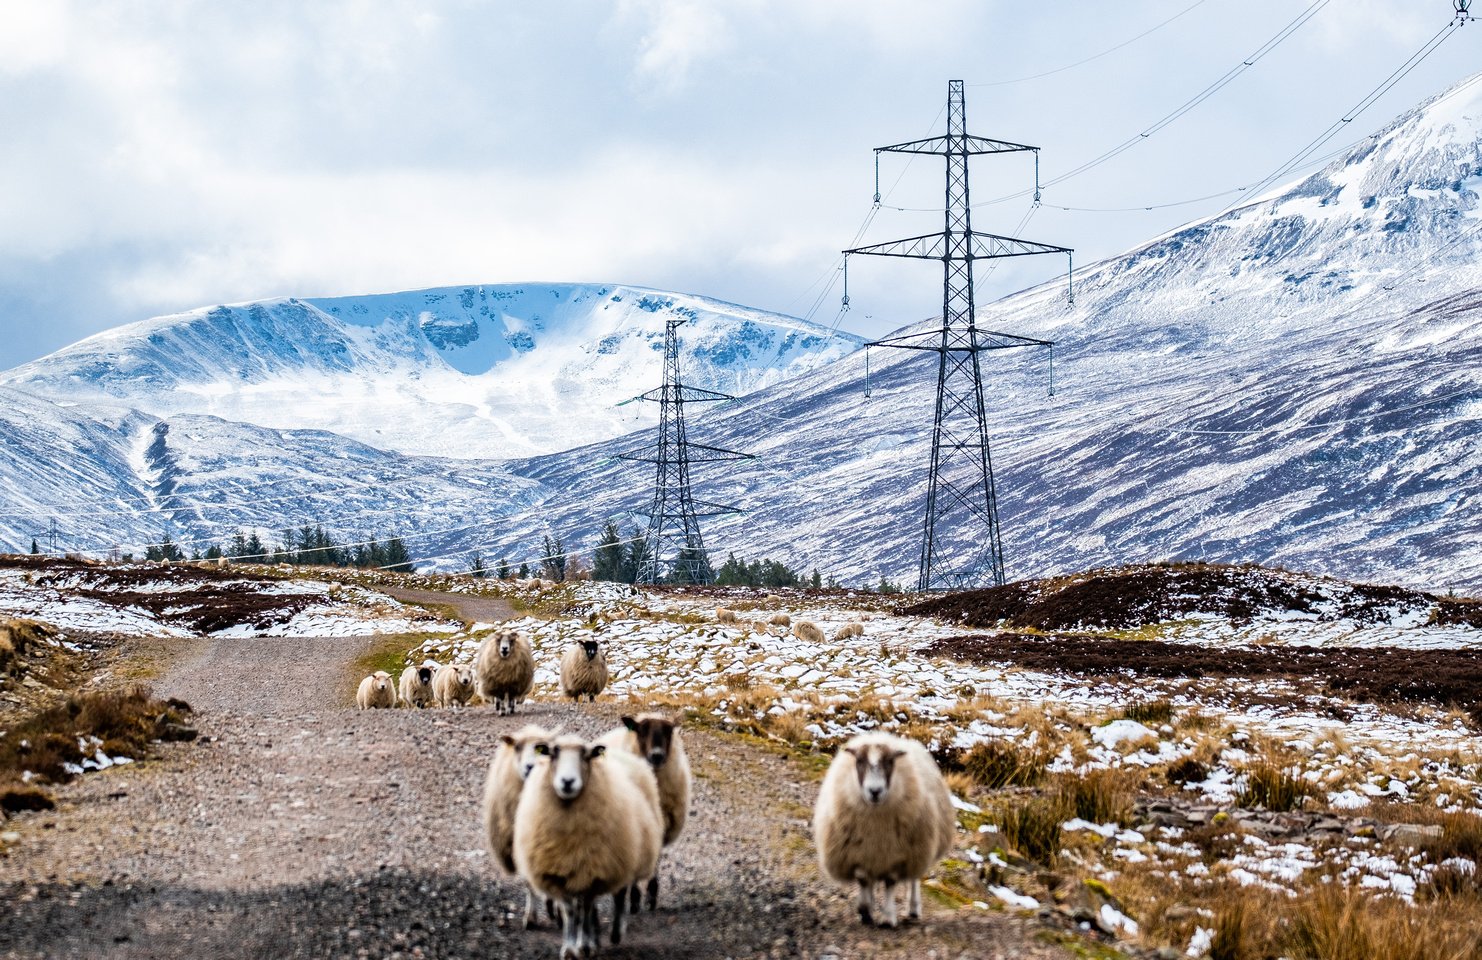 A flock of sheep standing on a road, with snow capped mountains and overhead powerlines in the background